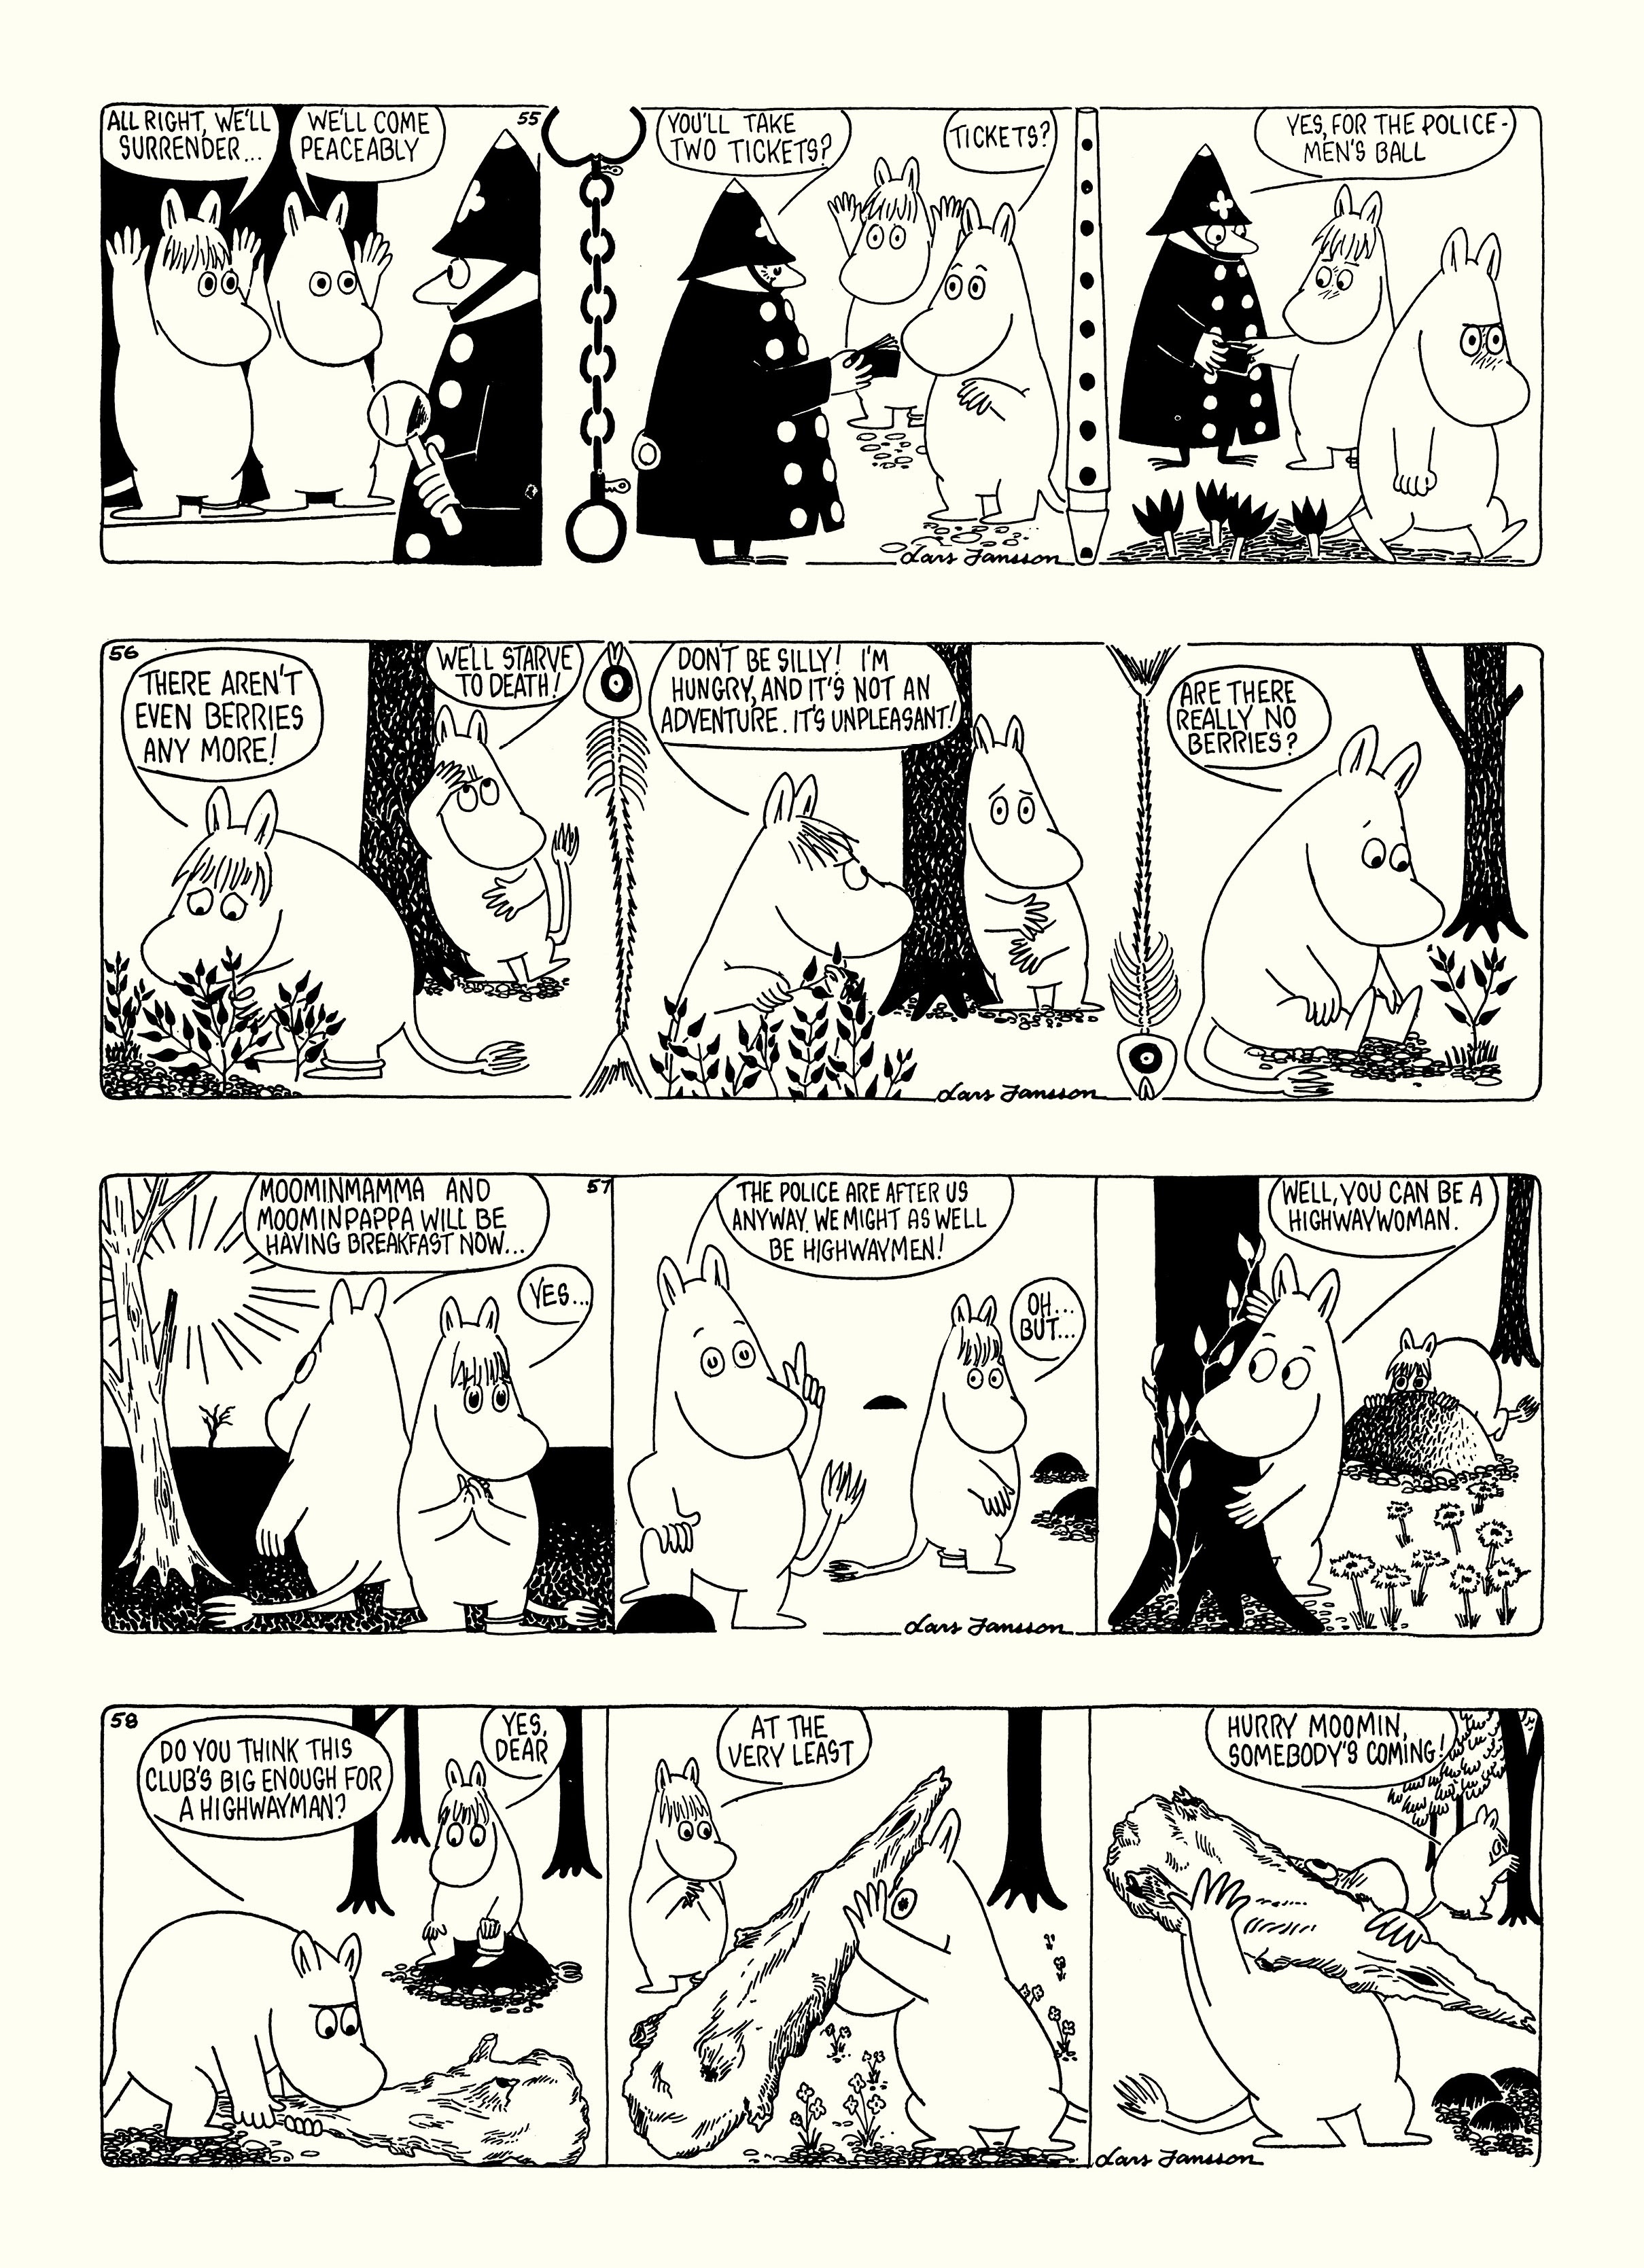 Read online Moomin: The Complete Lars Jansson Comic Strip comic -  Issue # TPB 6 - 20